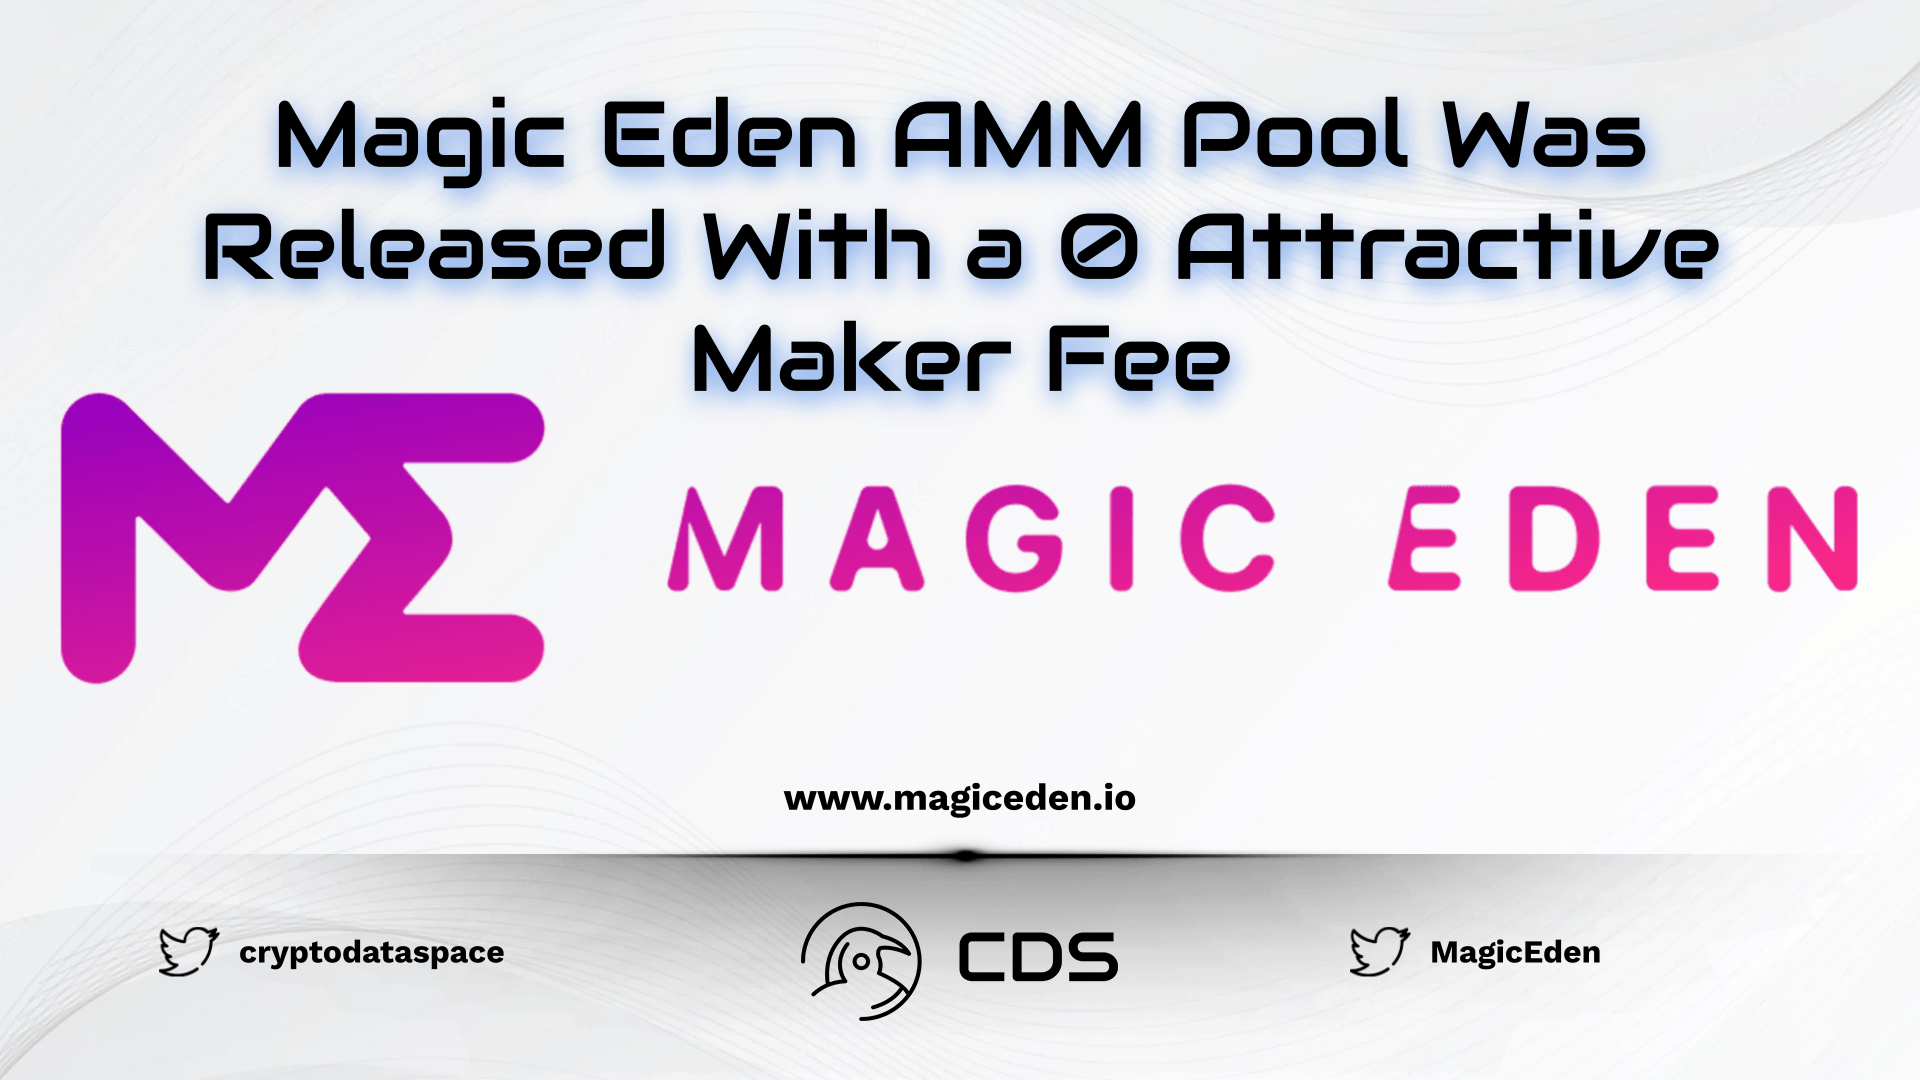 Magic Eden AMM Pool Was Released With a 0 Attractive Maker Fee